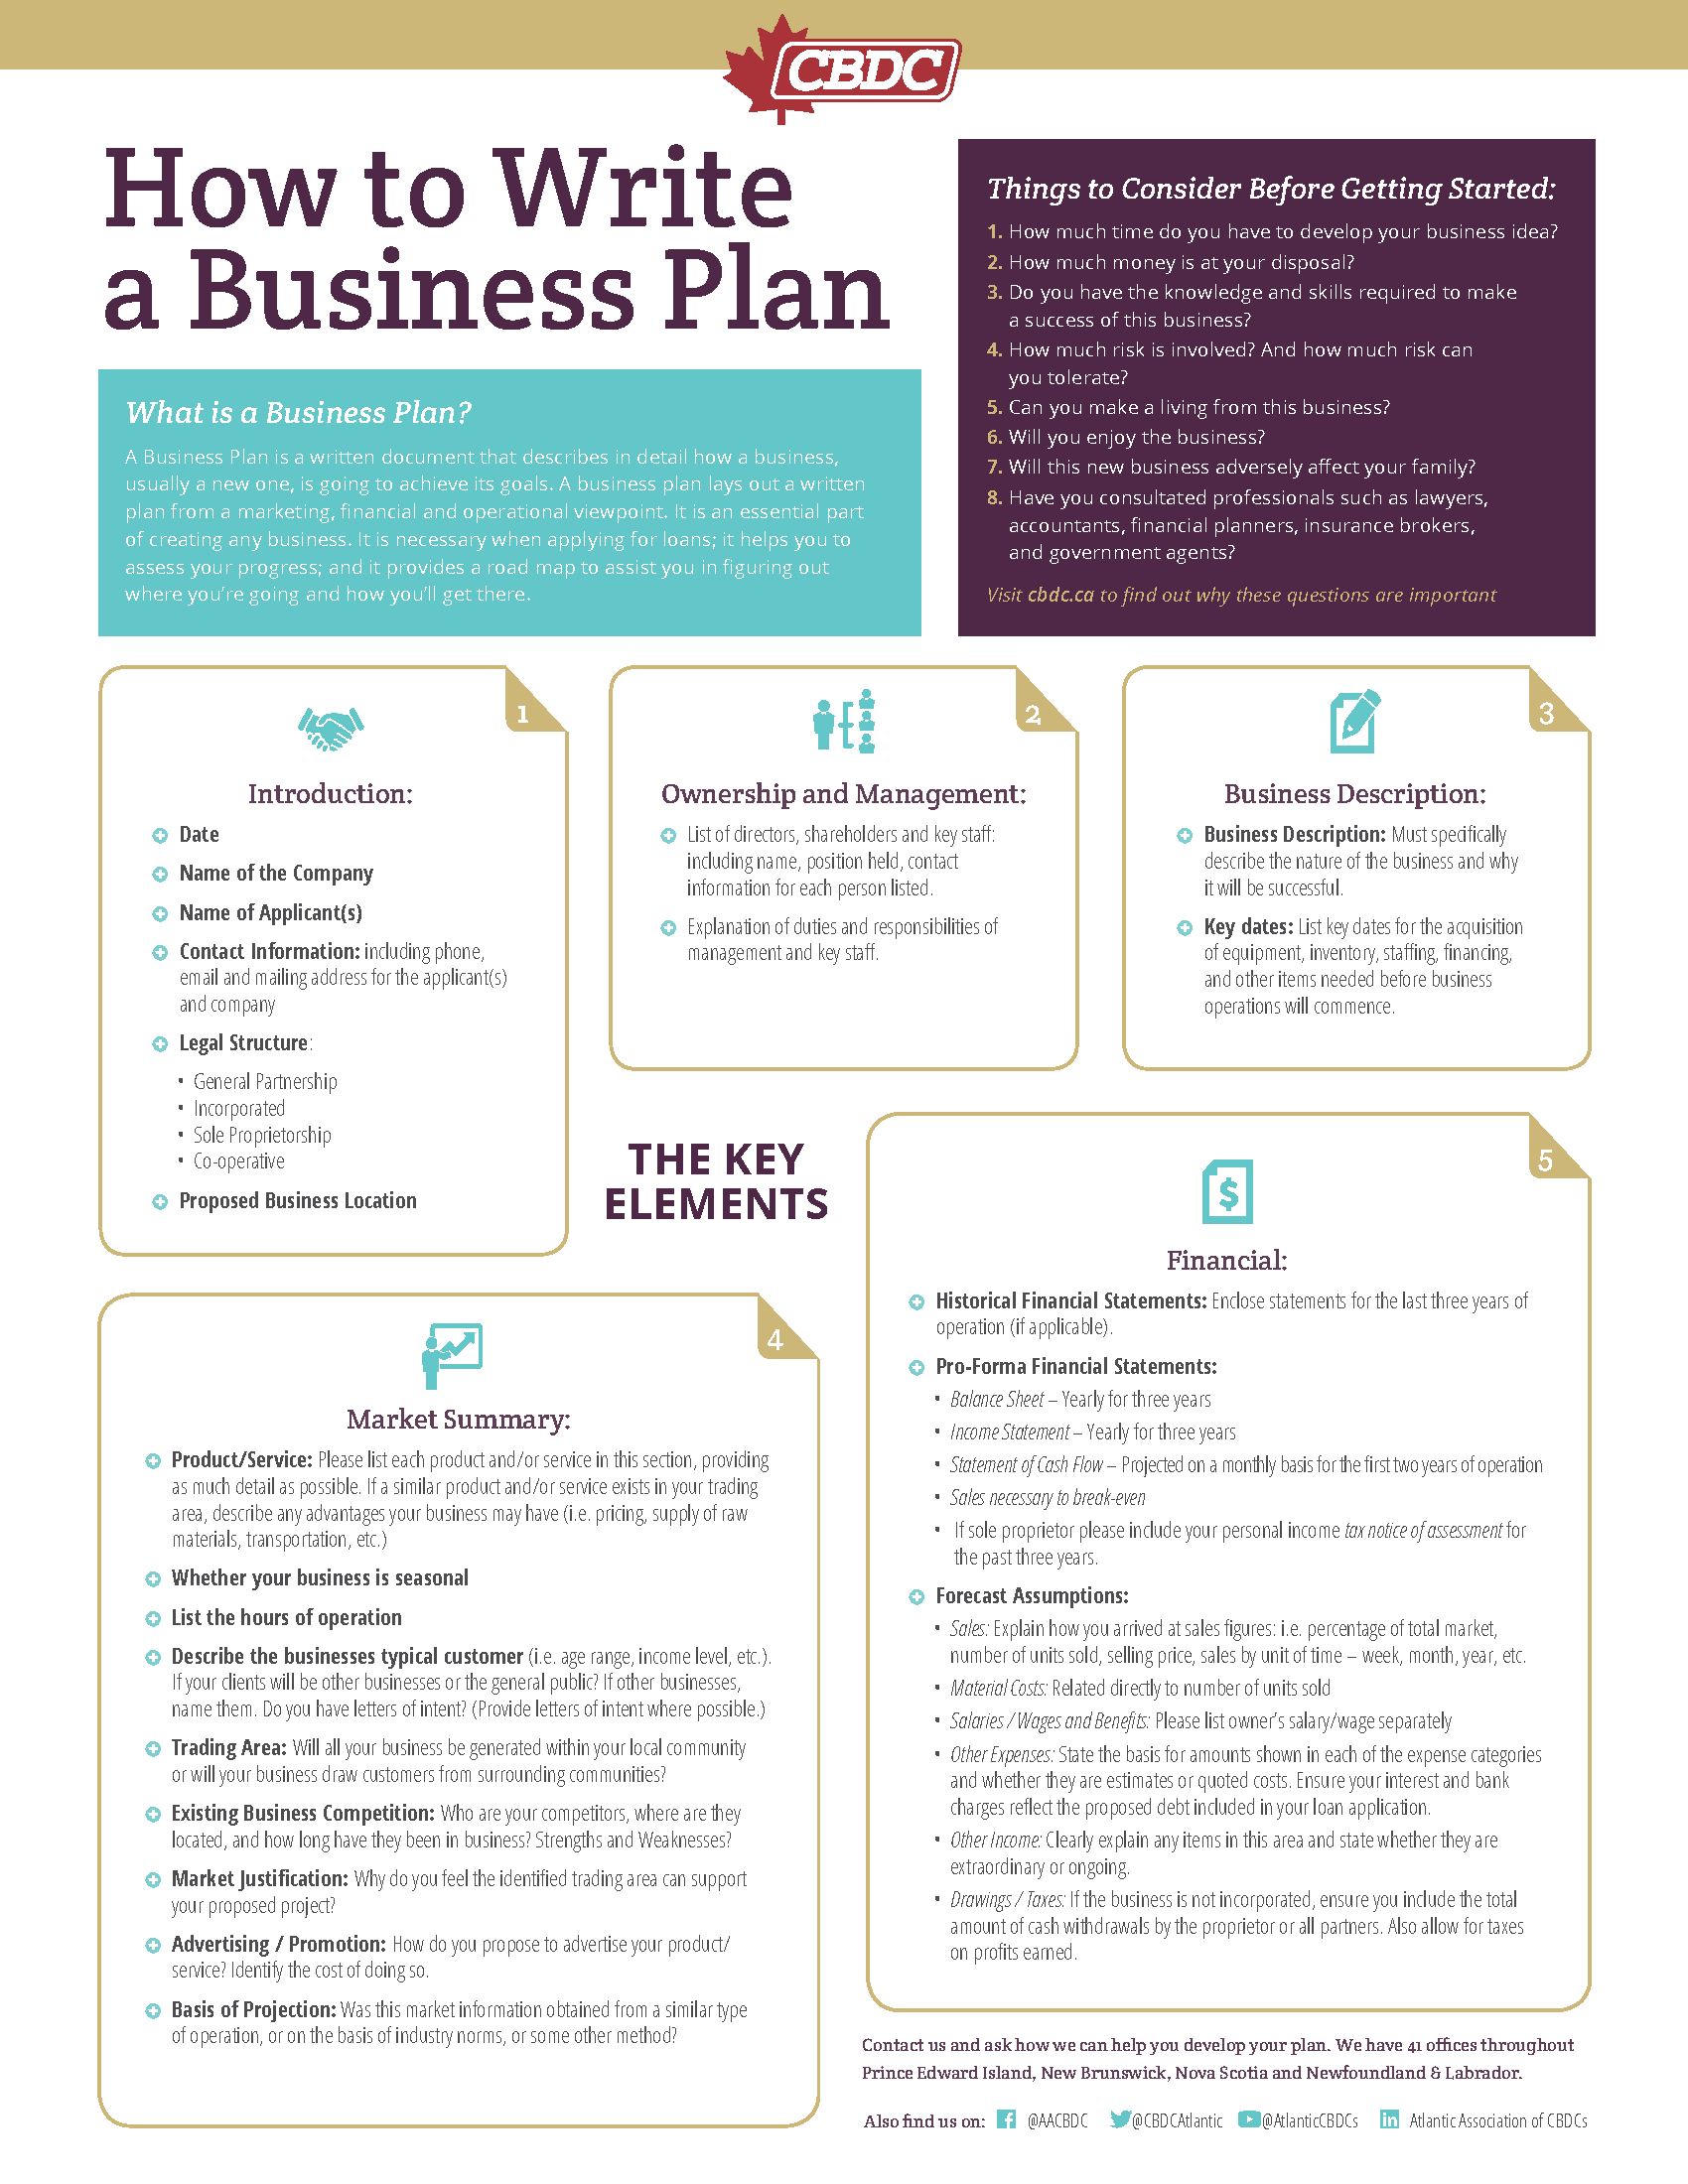 how to write a business plan for a tech startup